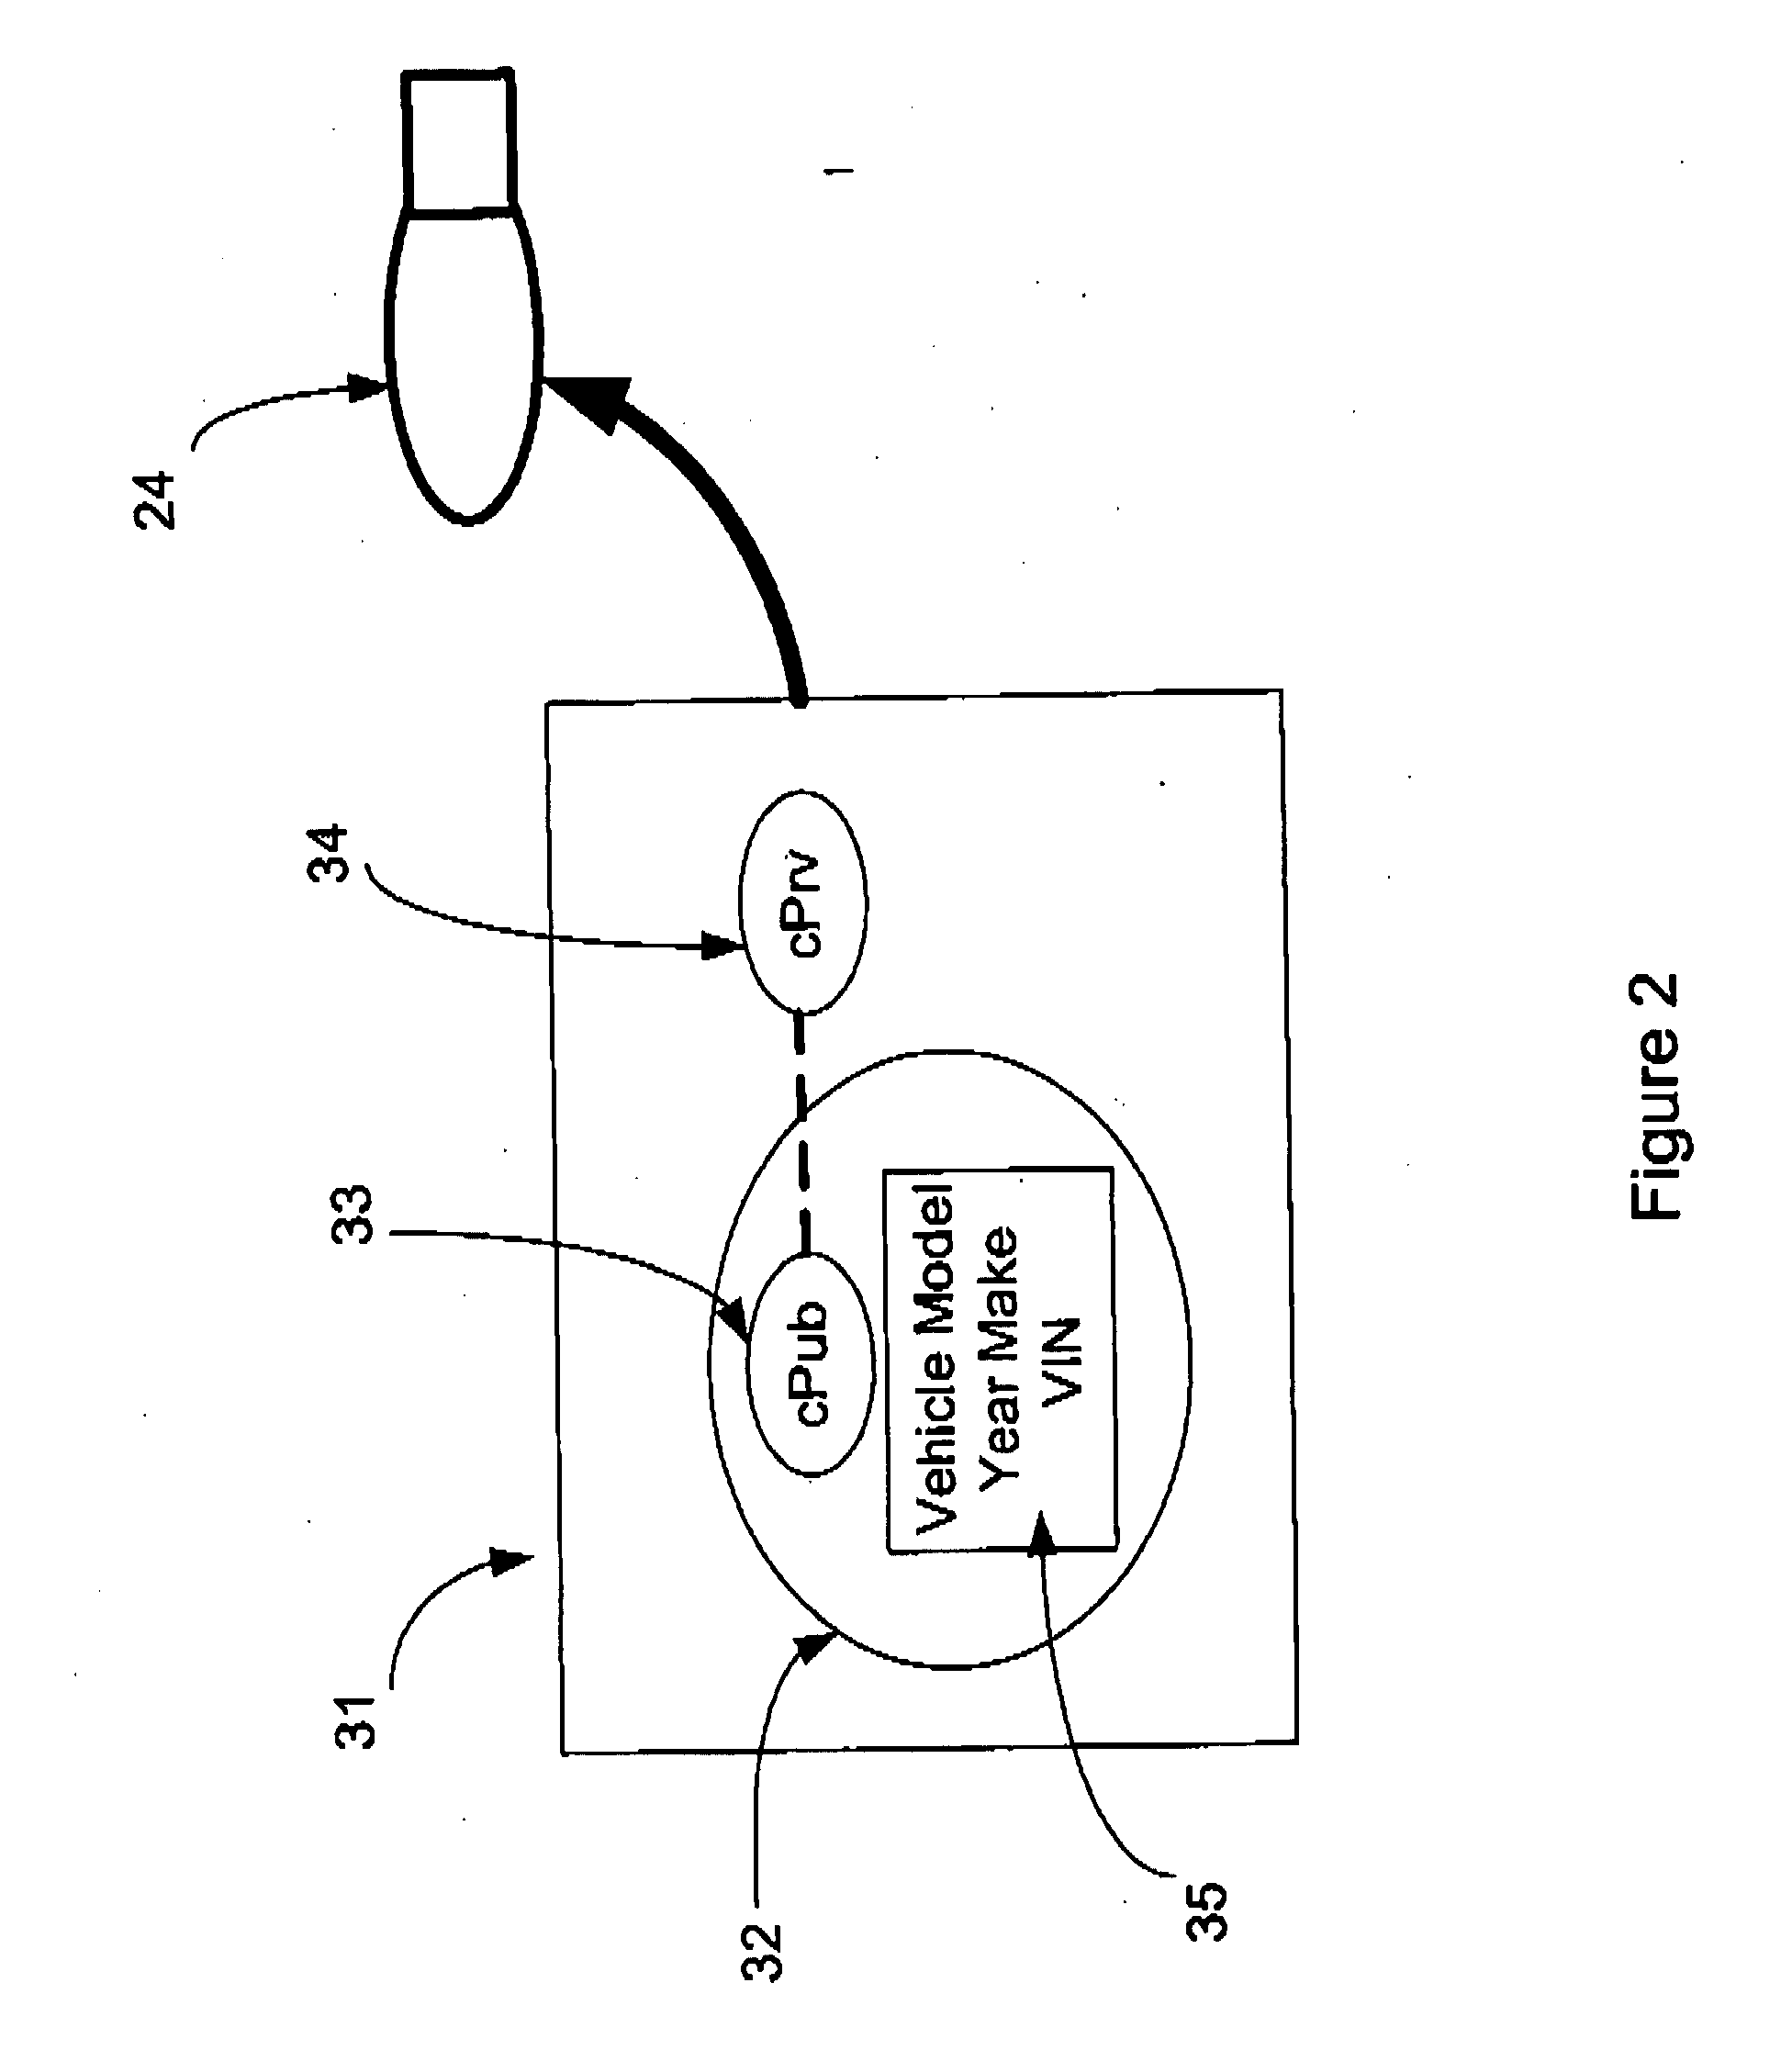 System and method for deterring theft of vehicles and other products having integral computer means